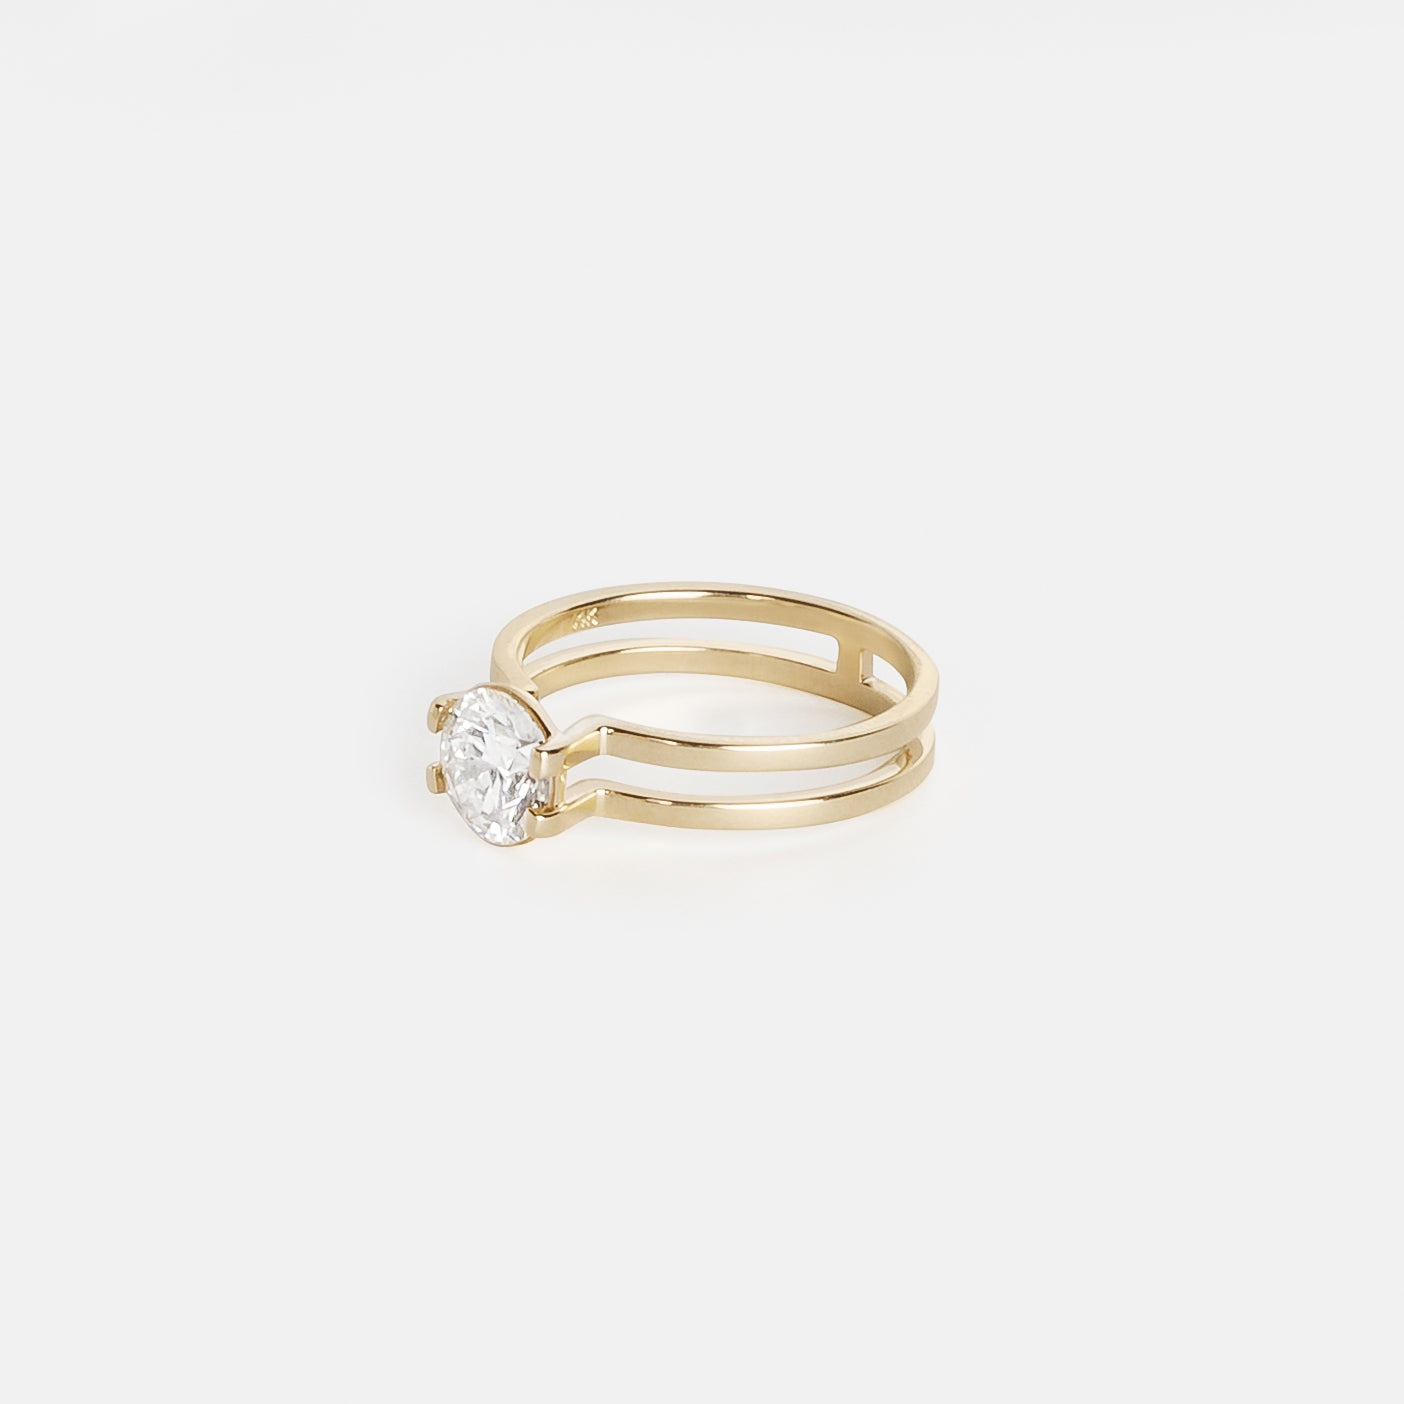 Vedi Cool Ring in 14k Gold set with a 1.01ct round brilliant cut natural diamond By SHW Fine Jewelry New York City